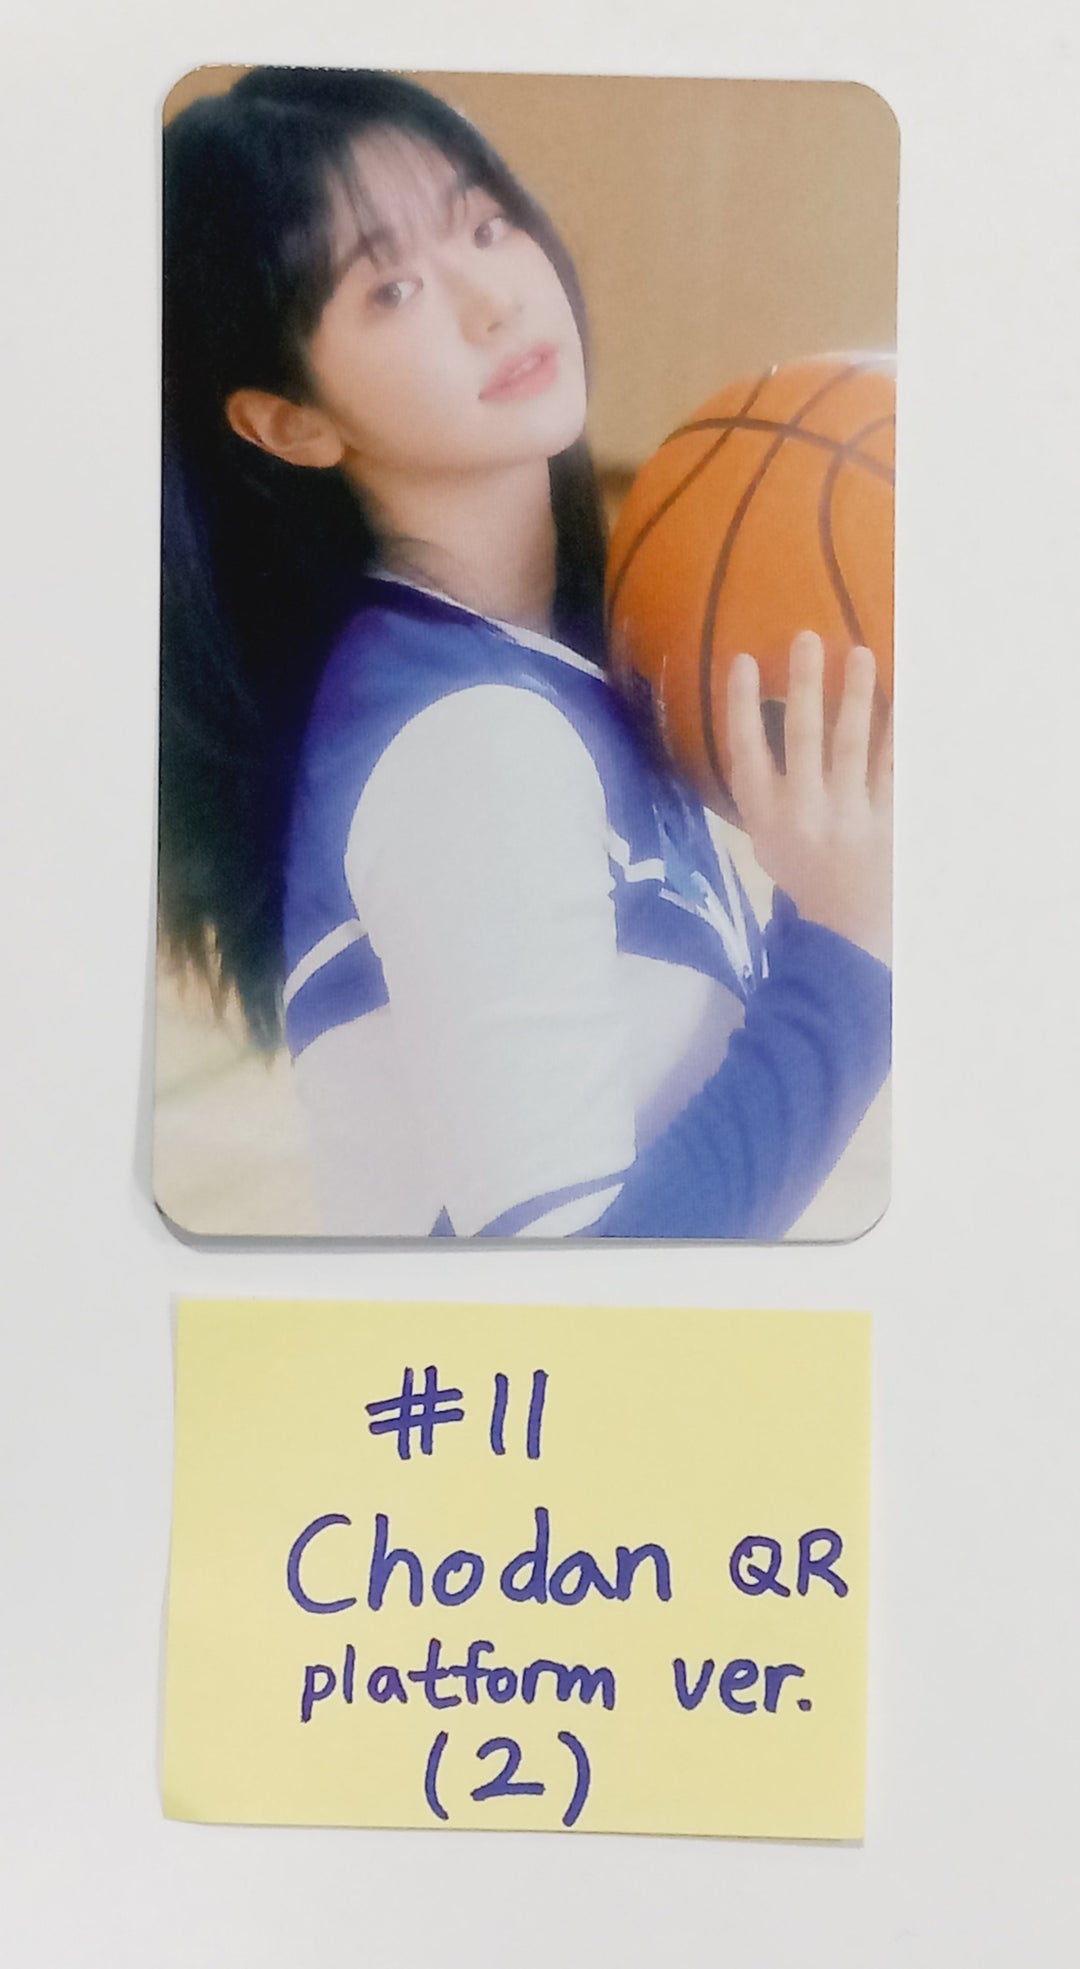 QWER "MANITO" - Official Photocard [Platform Ver.] [24.4.9]